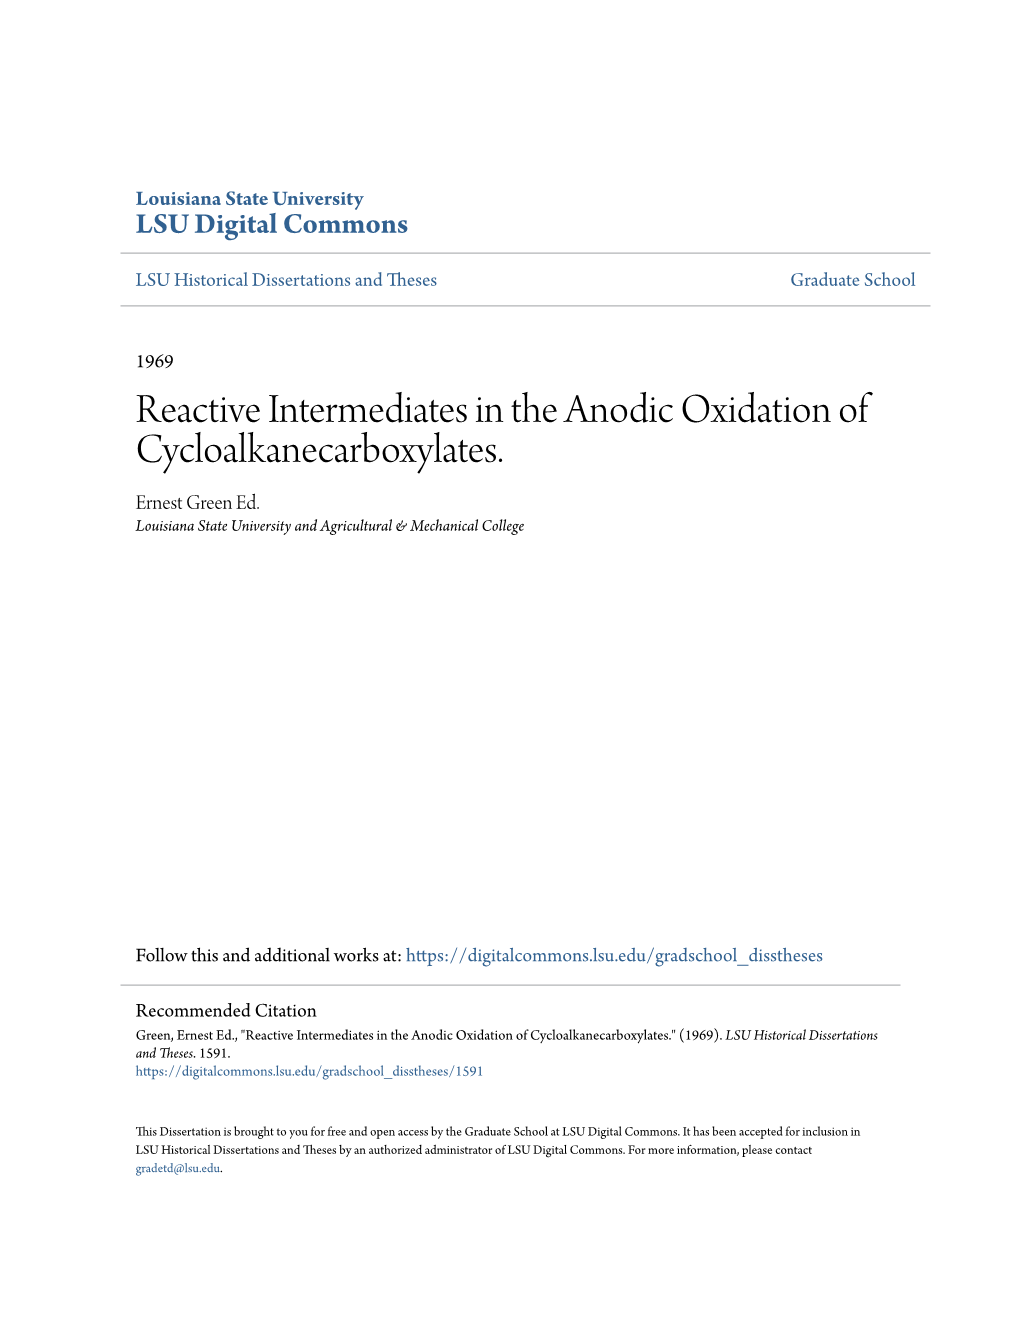 Reactive Intermediates in the Anodic Oxidation of Cycloalkanecarboxylates